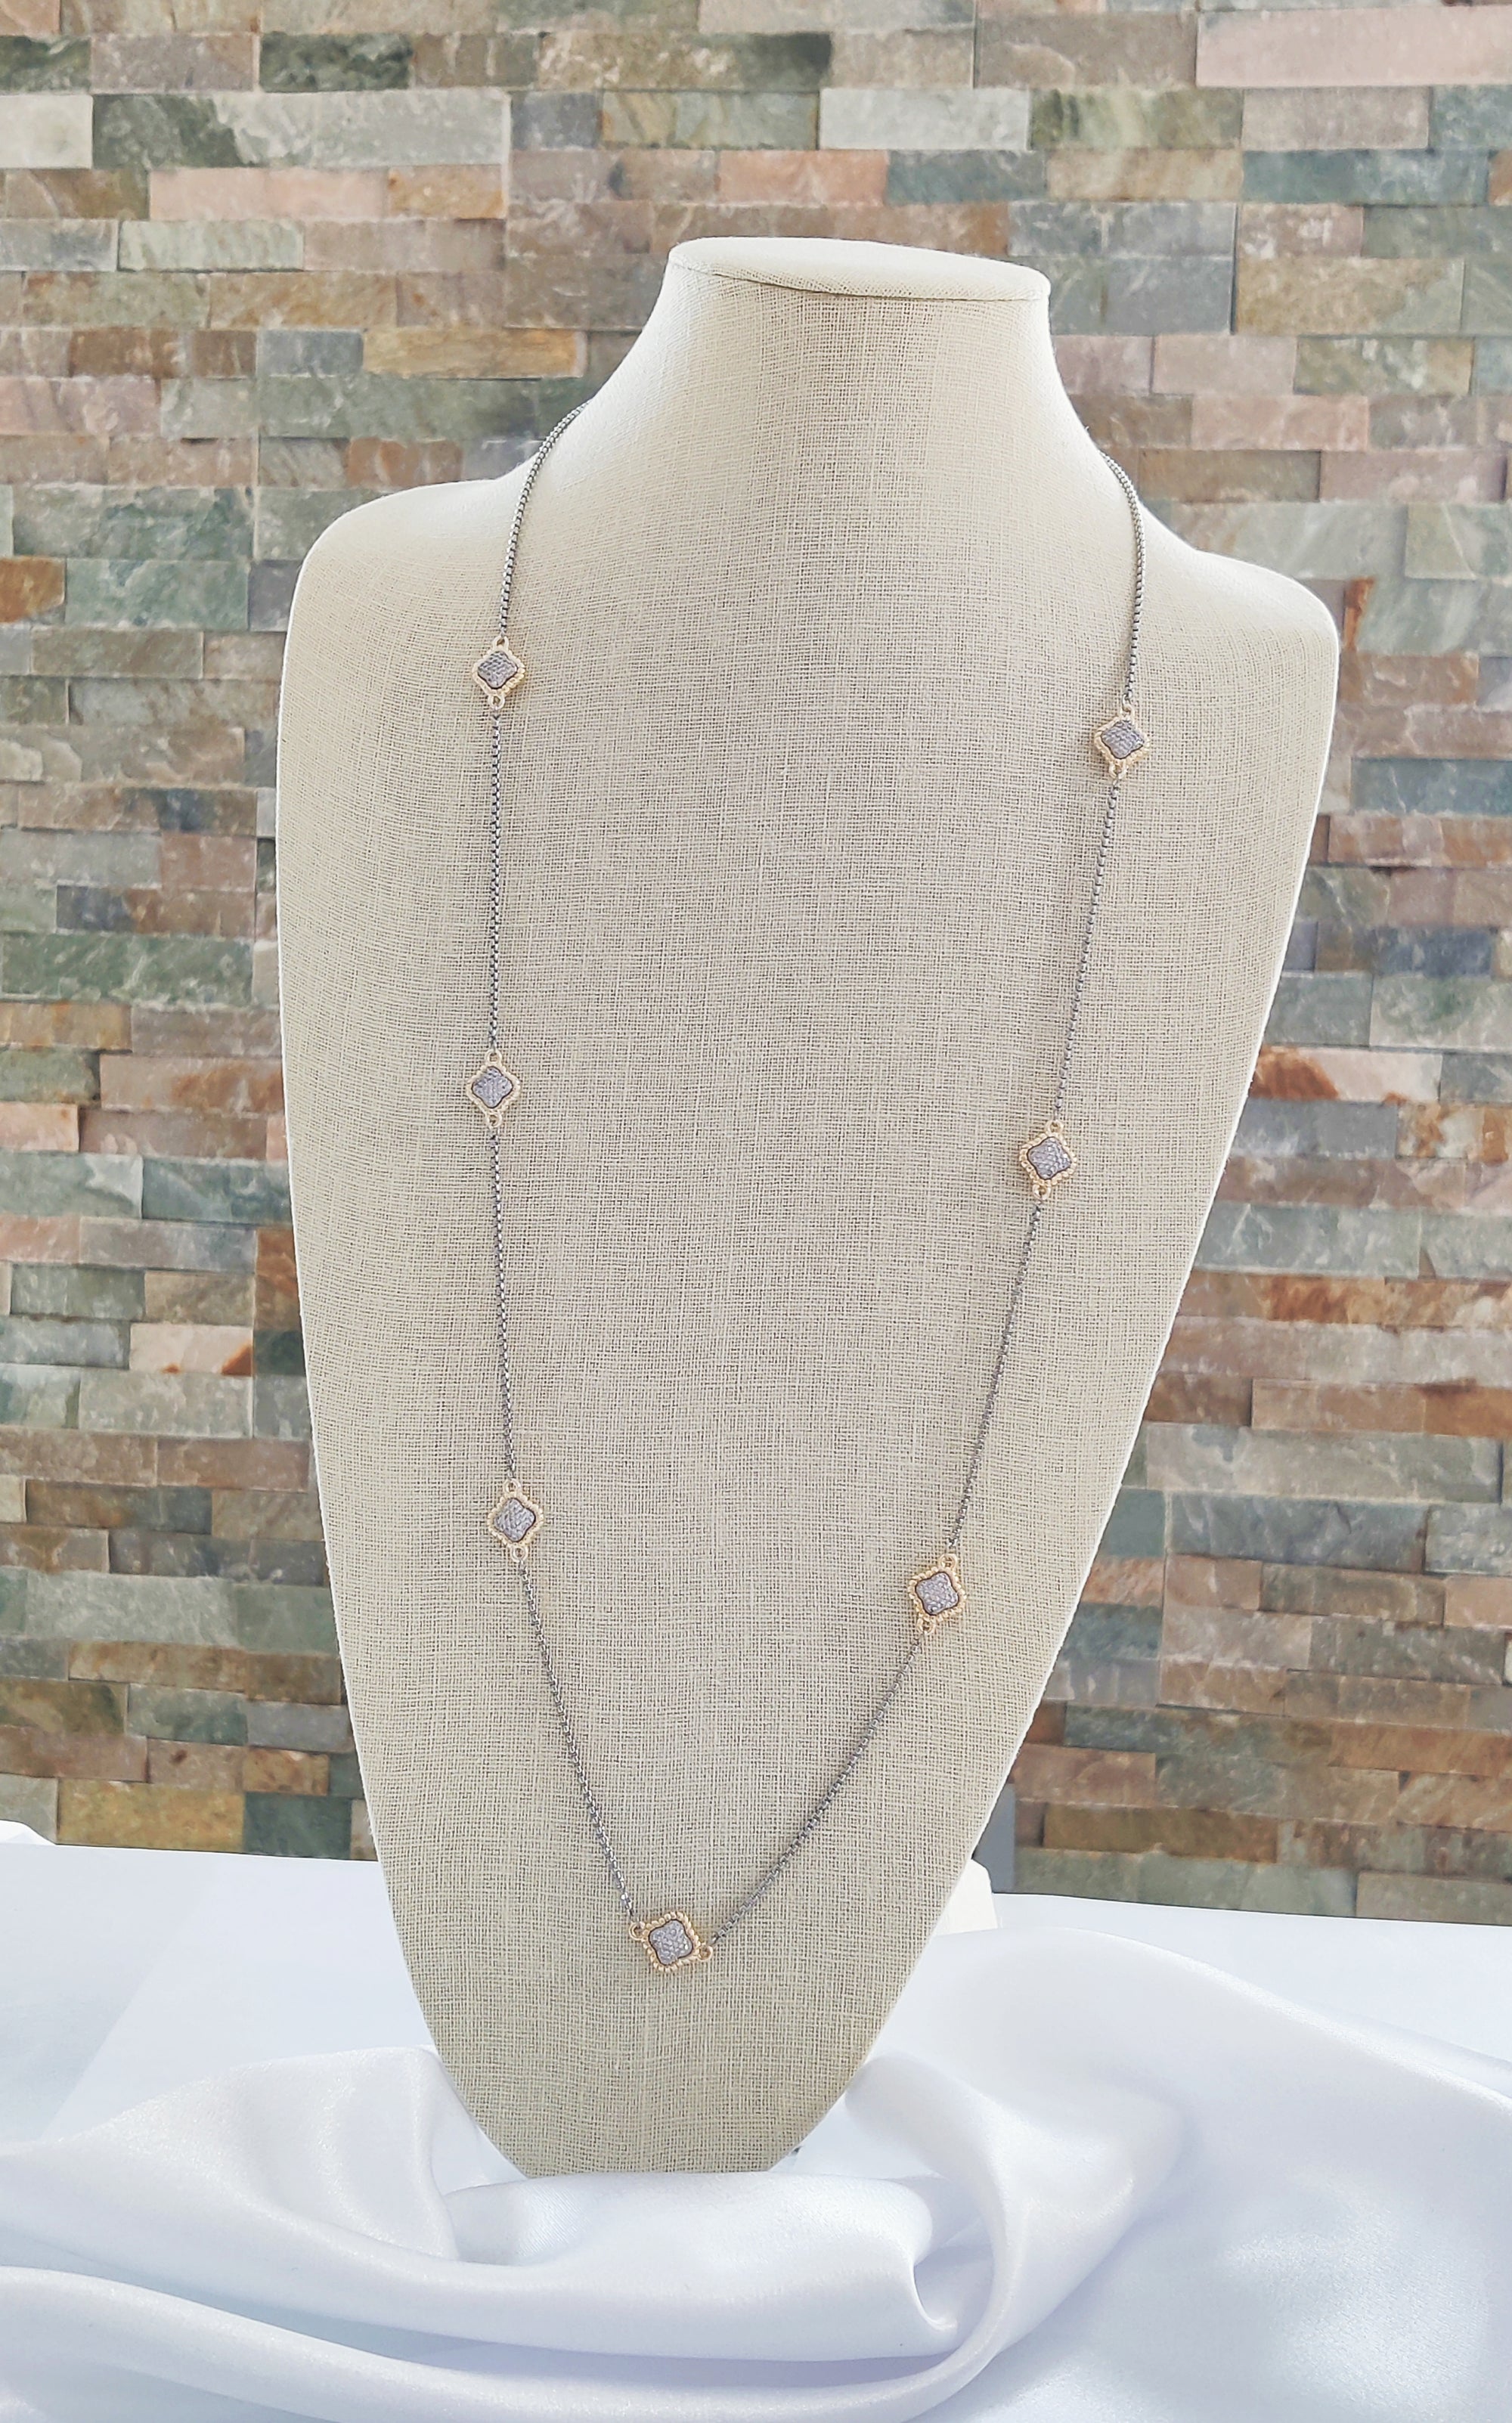 Long Two-tone Necklace